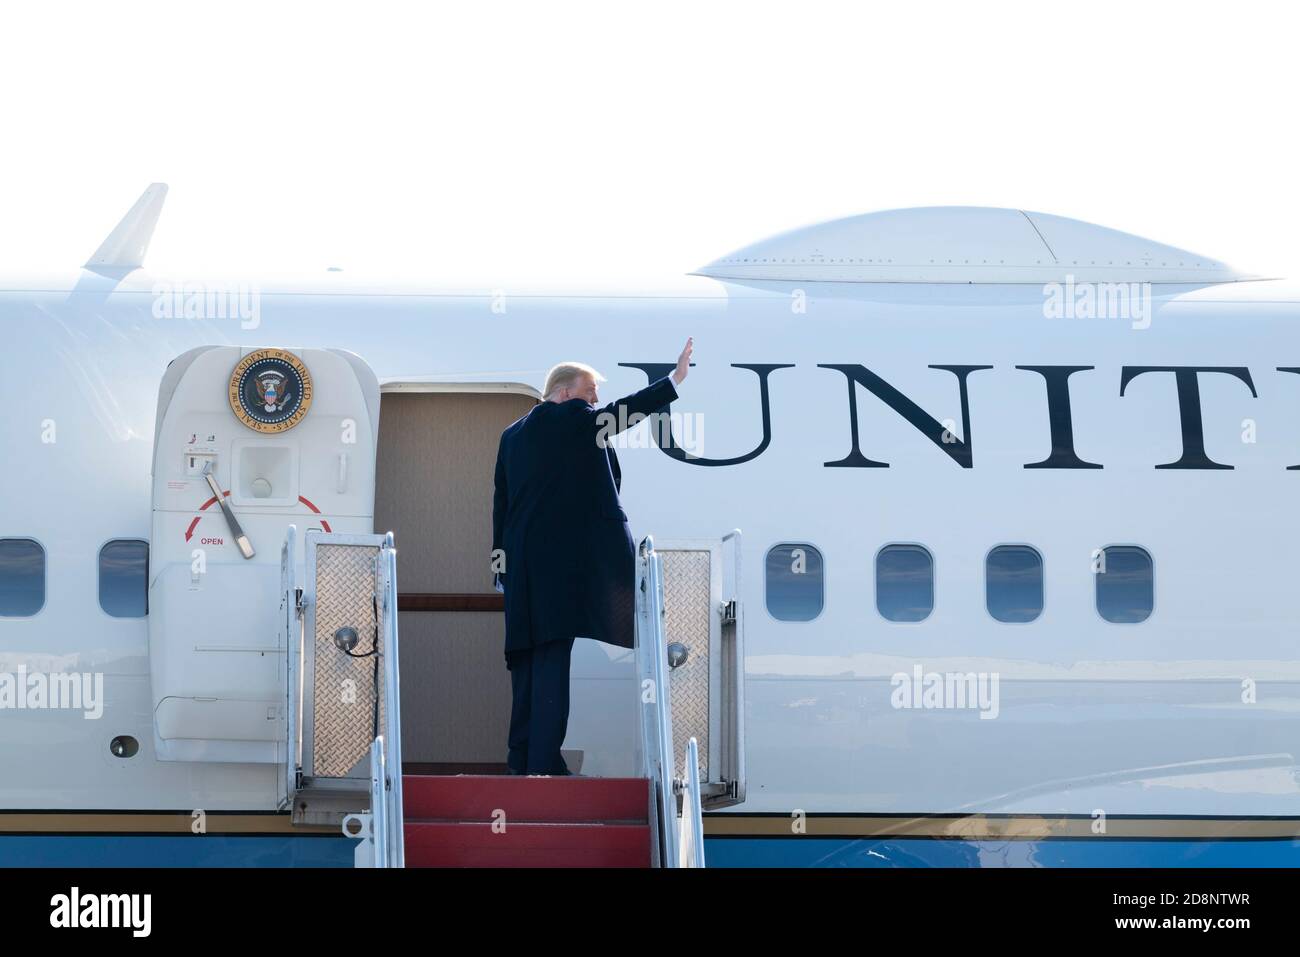 Ewing, New Jersey, USA. October 31, 2020: U.S. President Donald J. Trump waves as he departs Trenton Mercer Airport in Ewing, New Jersey after a campaign stop in near by Newtown PA. Trump will also stop n several towns in Pennsylvania including Butler and Reading, PA Credit: Brian Branch Price/ZUMA Wire/Alamy Live News Credit: ZUMA Press, Inc./Alamy Live News Stock Photo